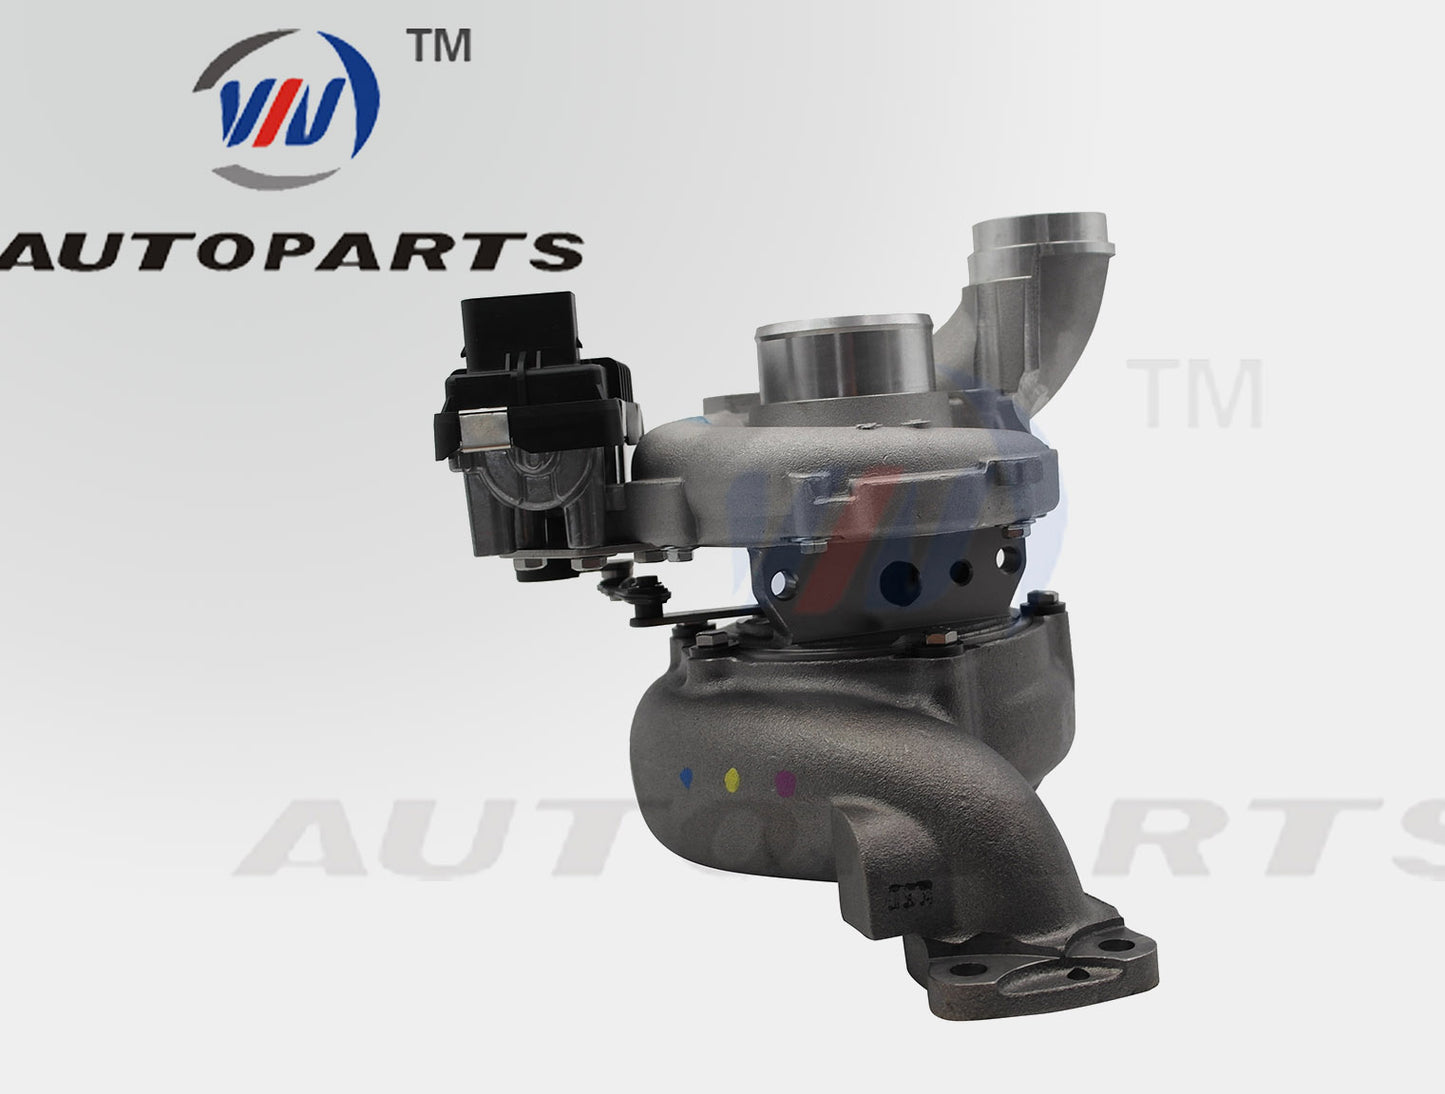 GTA2052GVK Turbocharger 765155-5007S for Chrysler 300C, Jeep Grand Cherokee, Mercedes Benz varies with 3.0L Diesel OM642 Engine